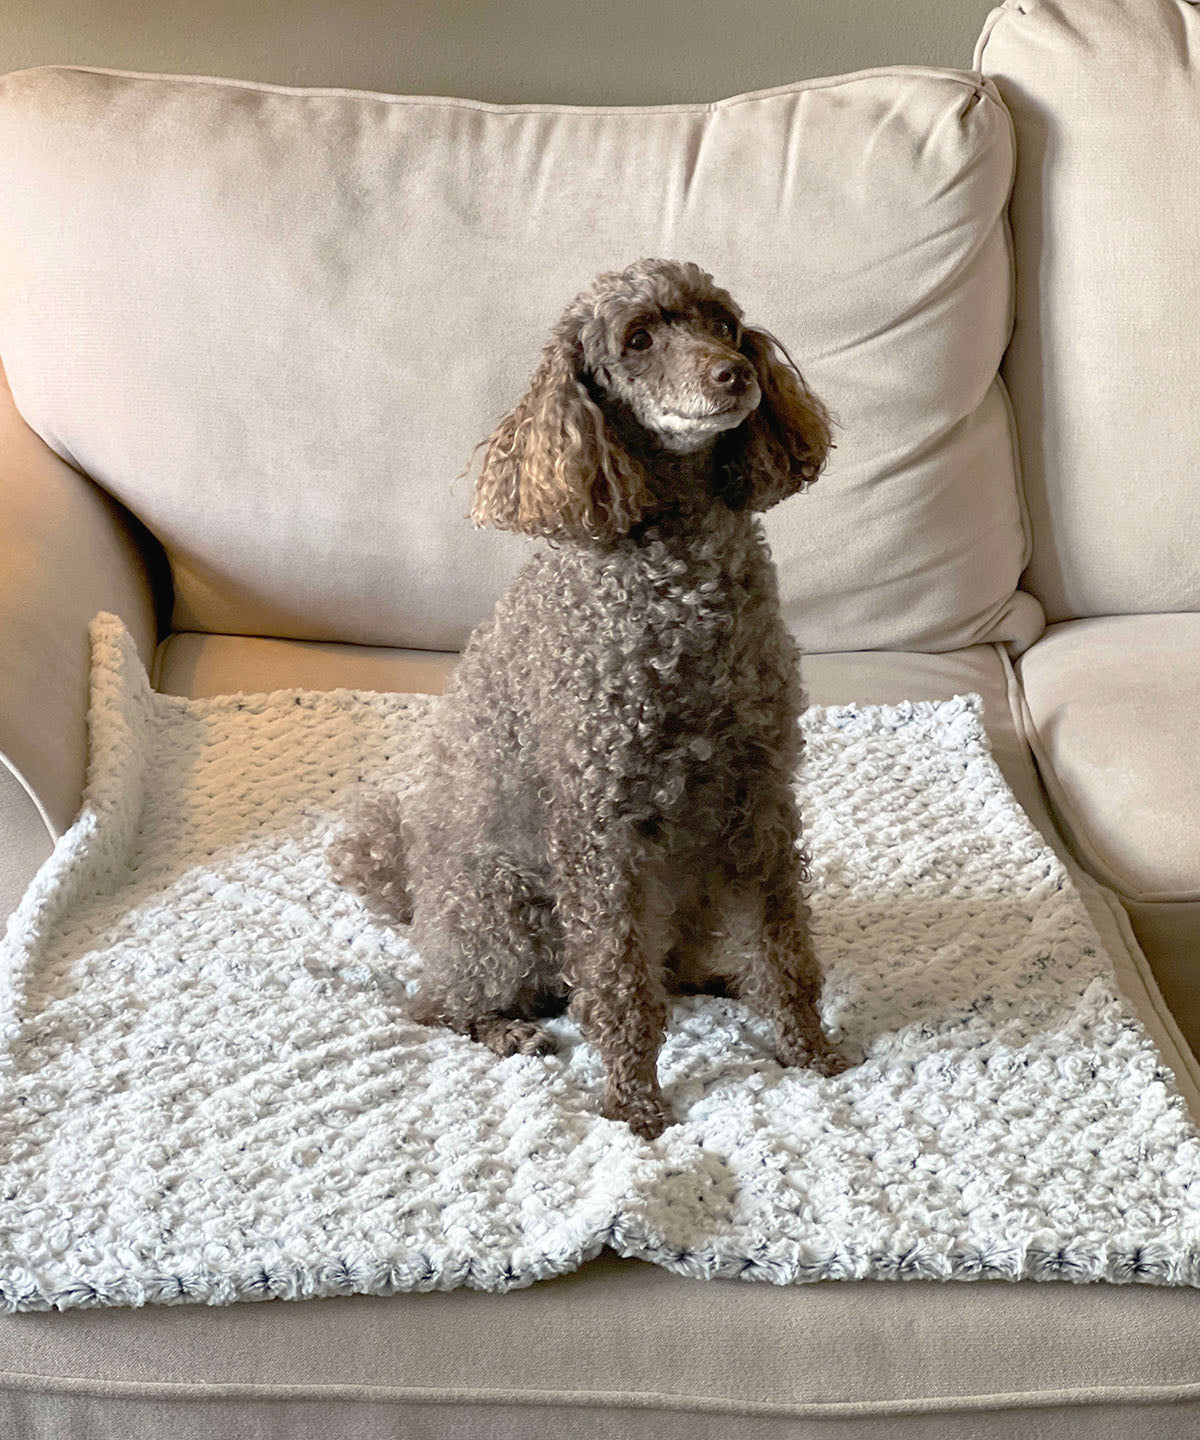 Dog and Pet Blanket - Poodle on throw in Rosebud Black Faux Fur - Handmade in the USA by Pandemonium Seattle